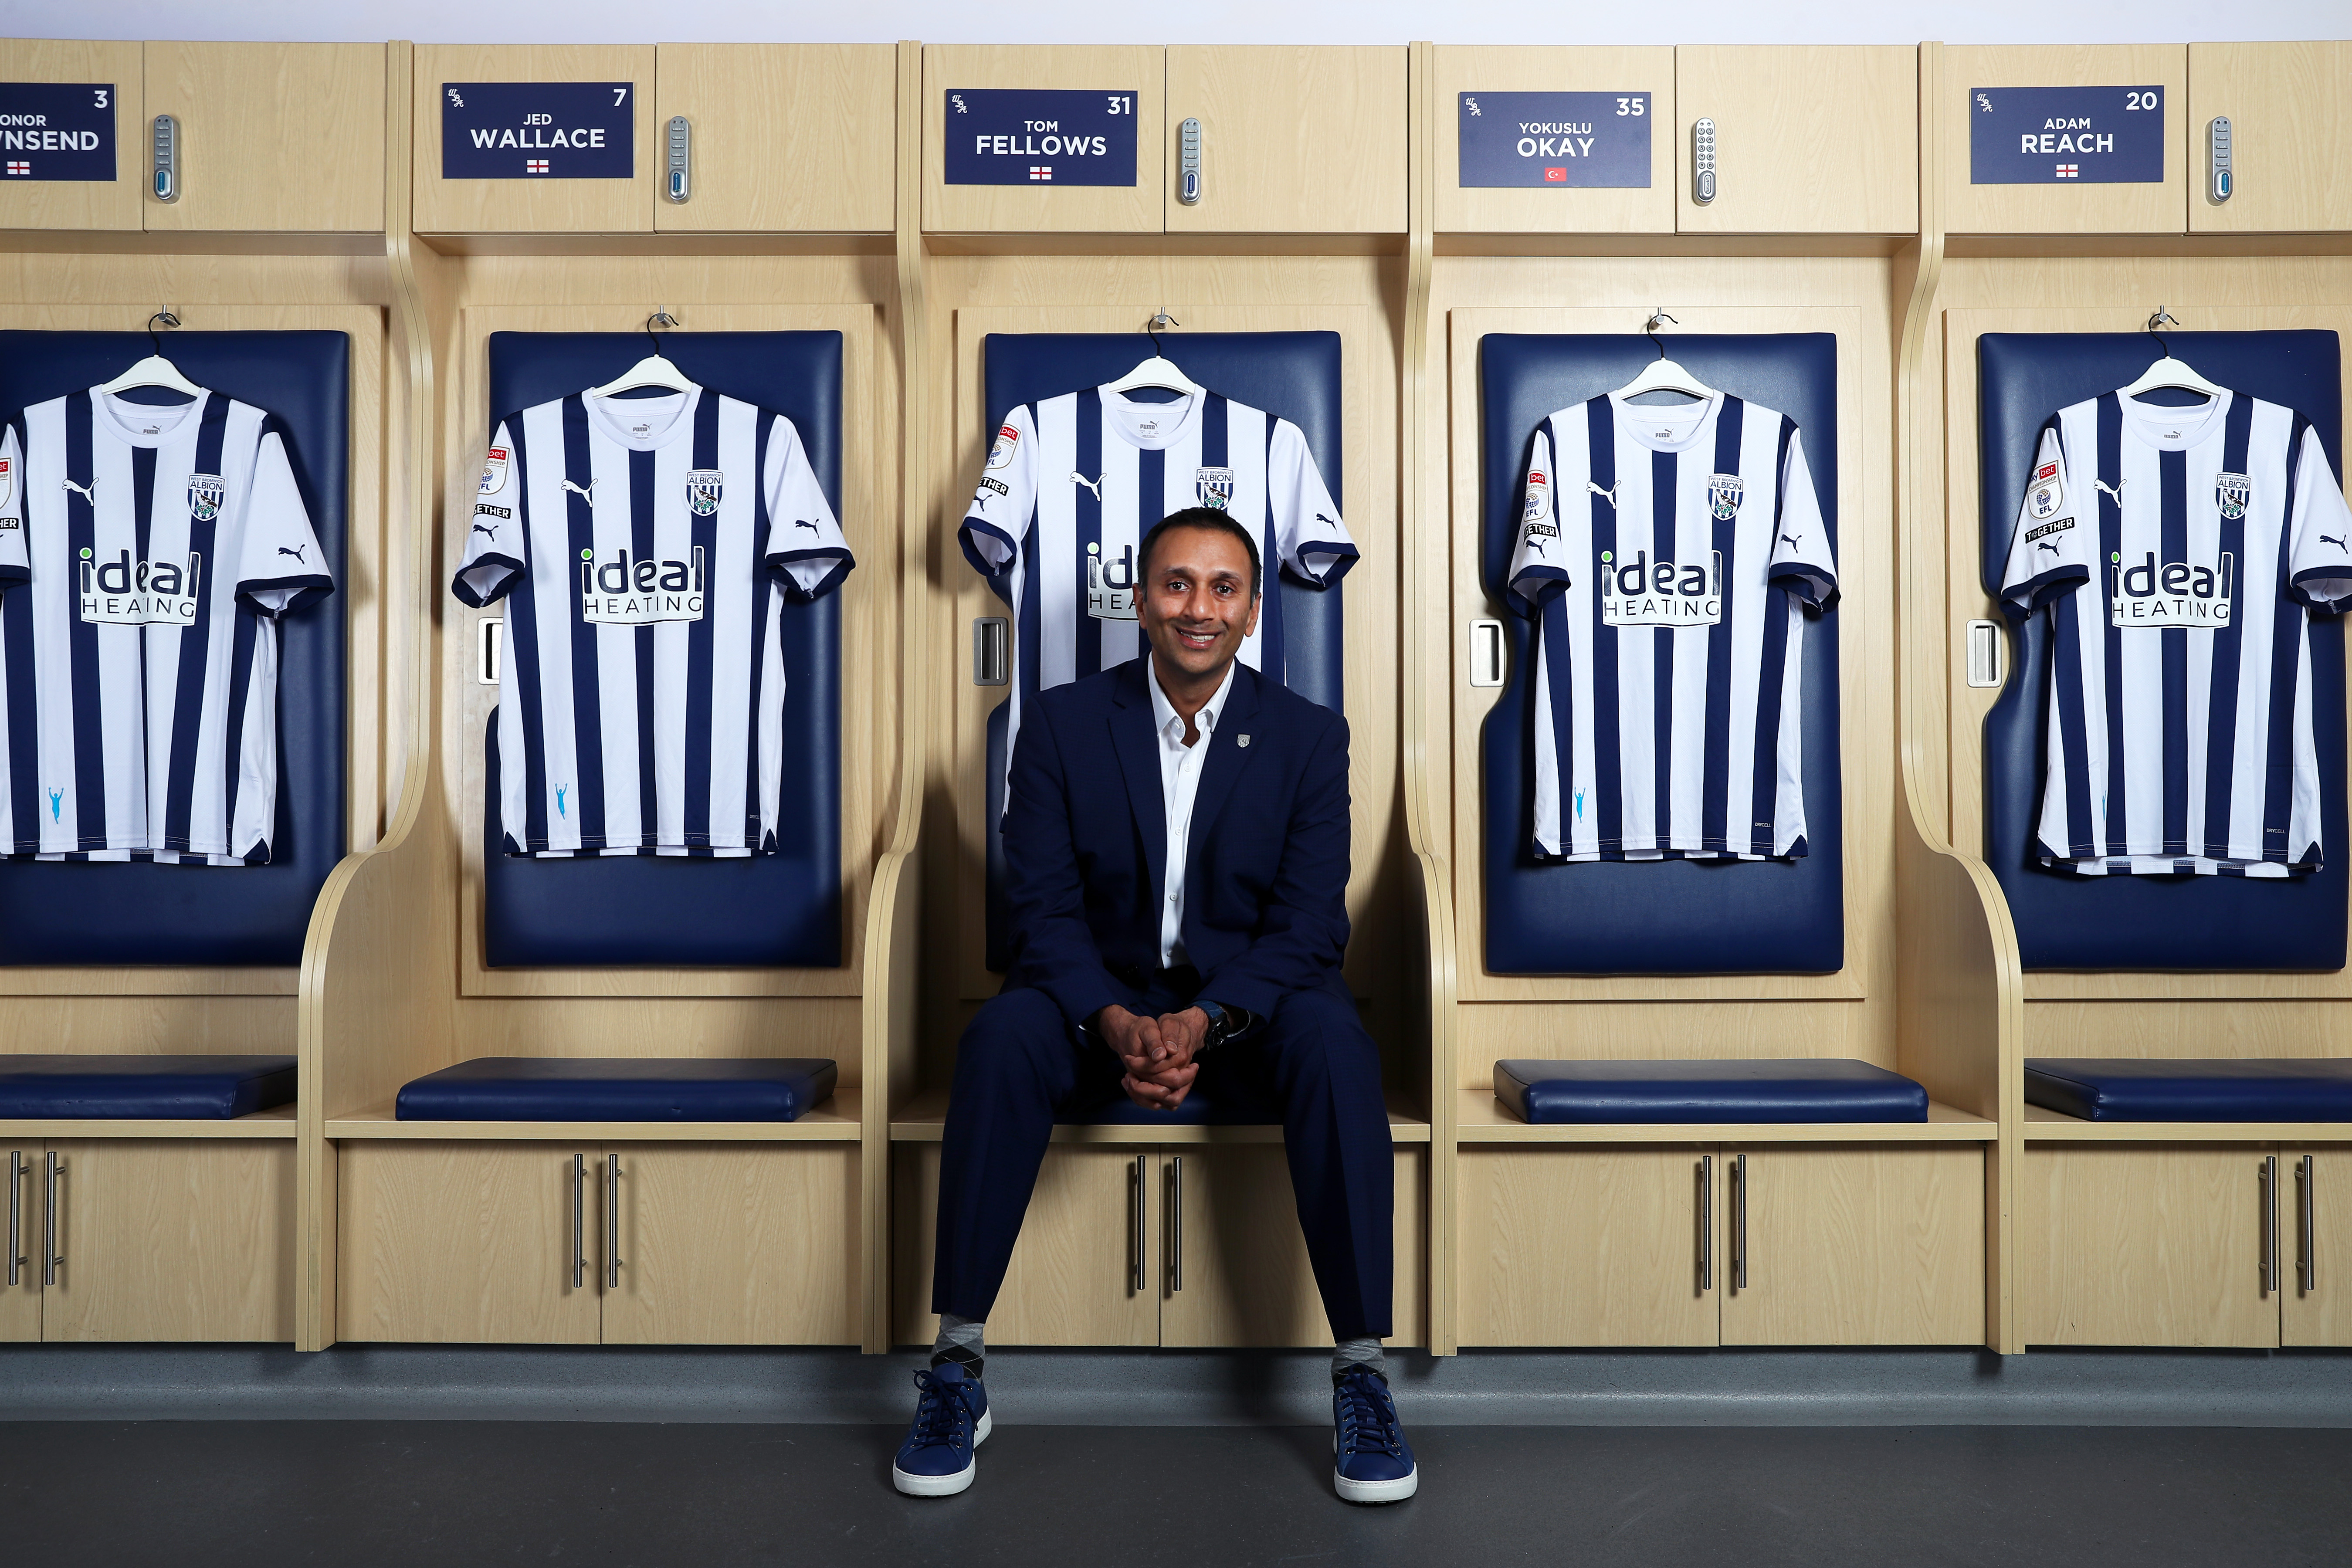 Shilen Patel sat in the home dressing room smiling at the camera with several home shirts hanging up behind him